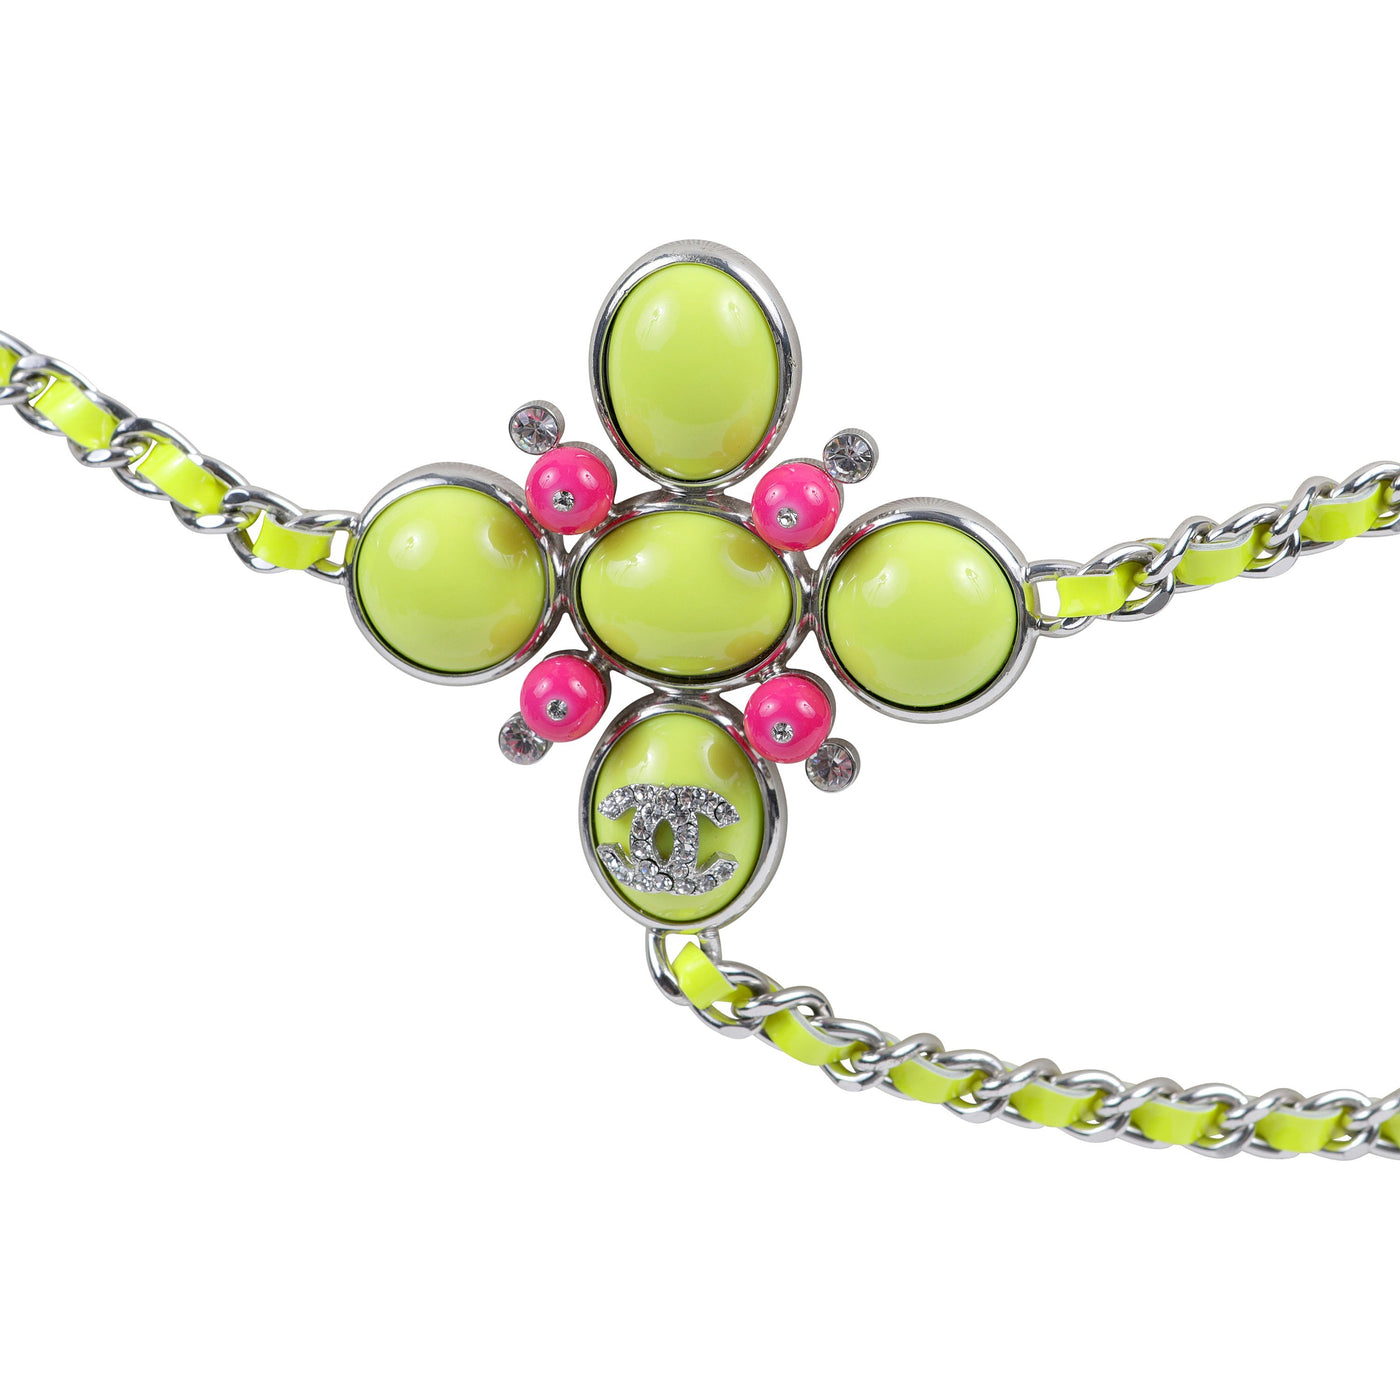 Chanel Chartreuse Green Patent Leather Chain Belt w/ Pink Brooch & Silver Hardware